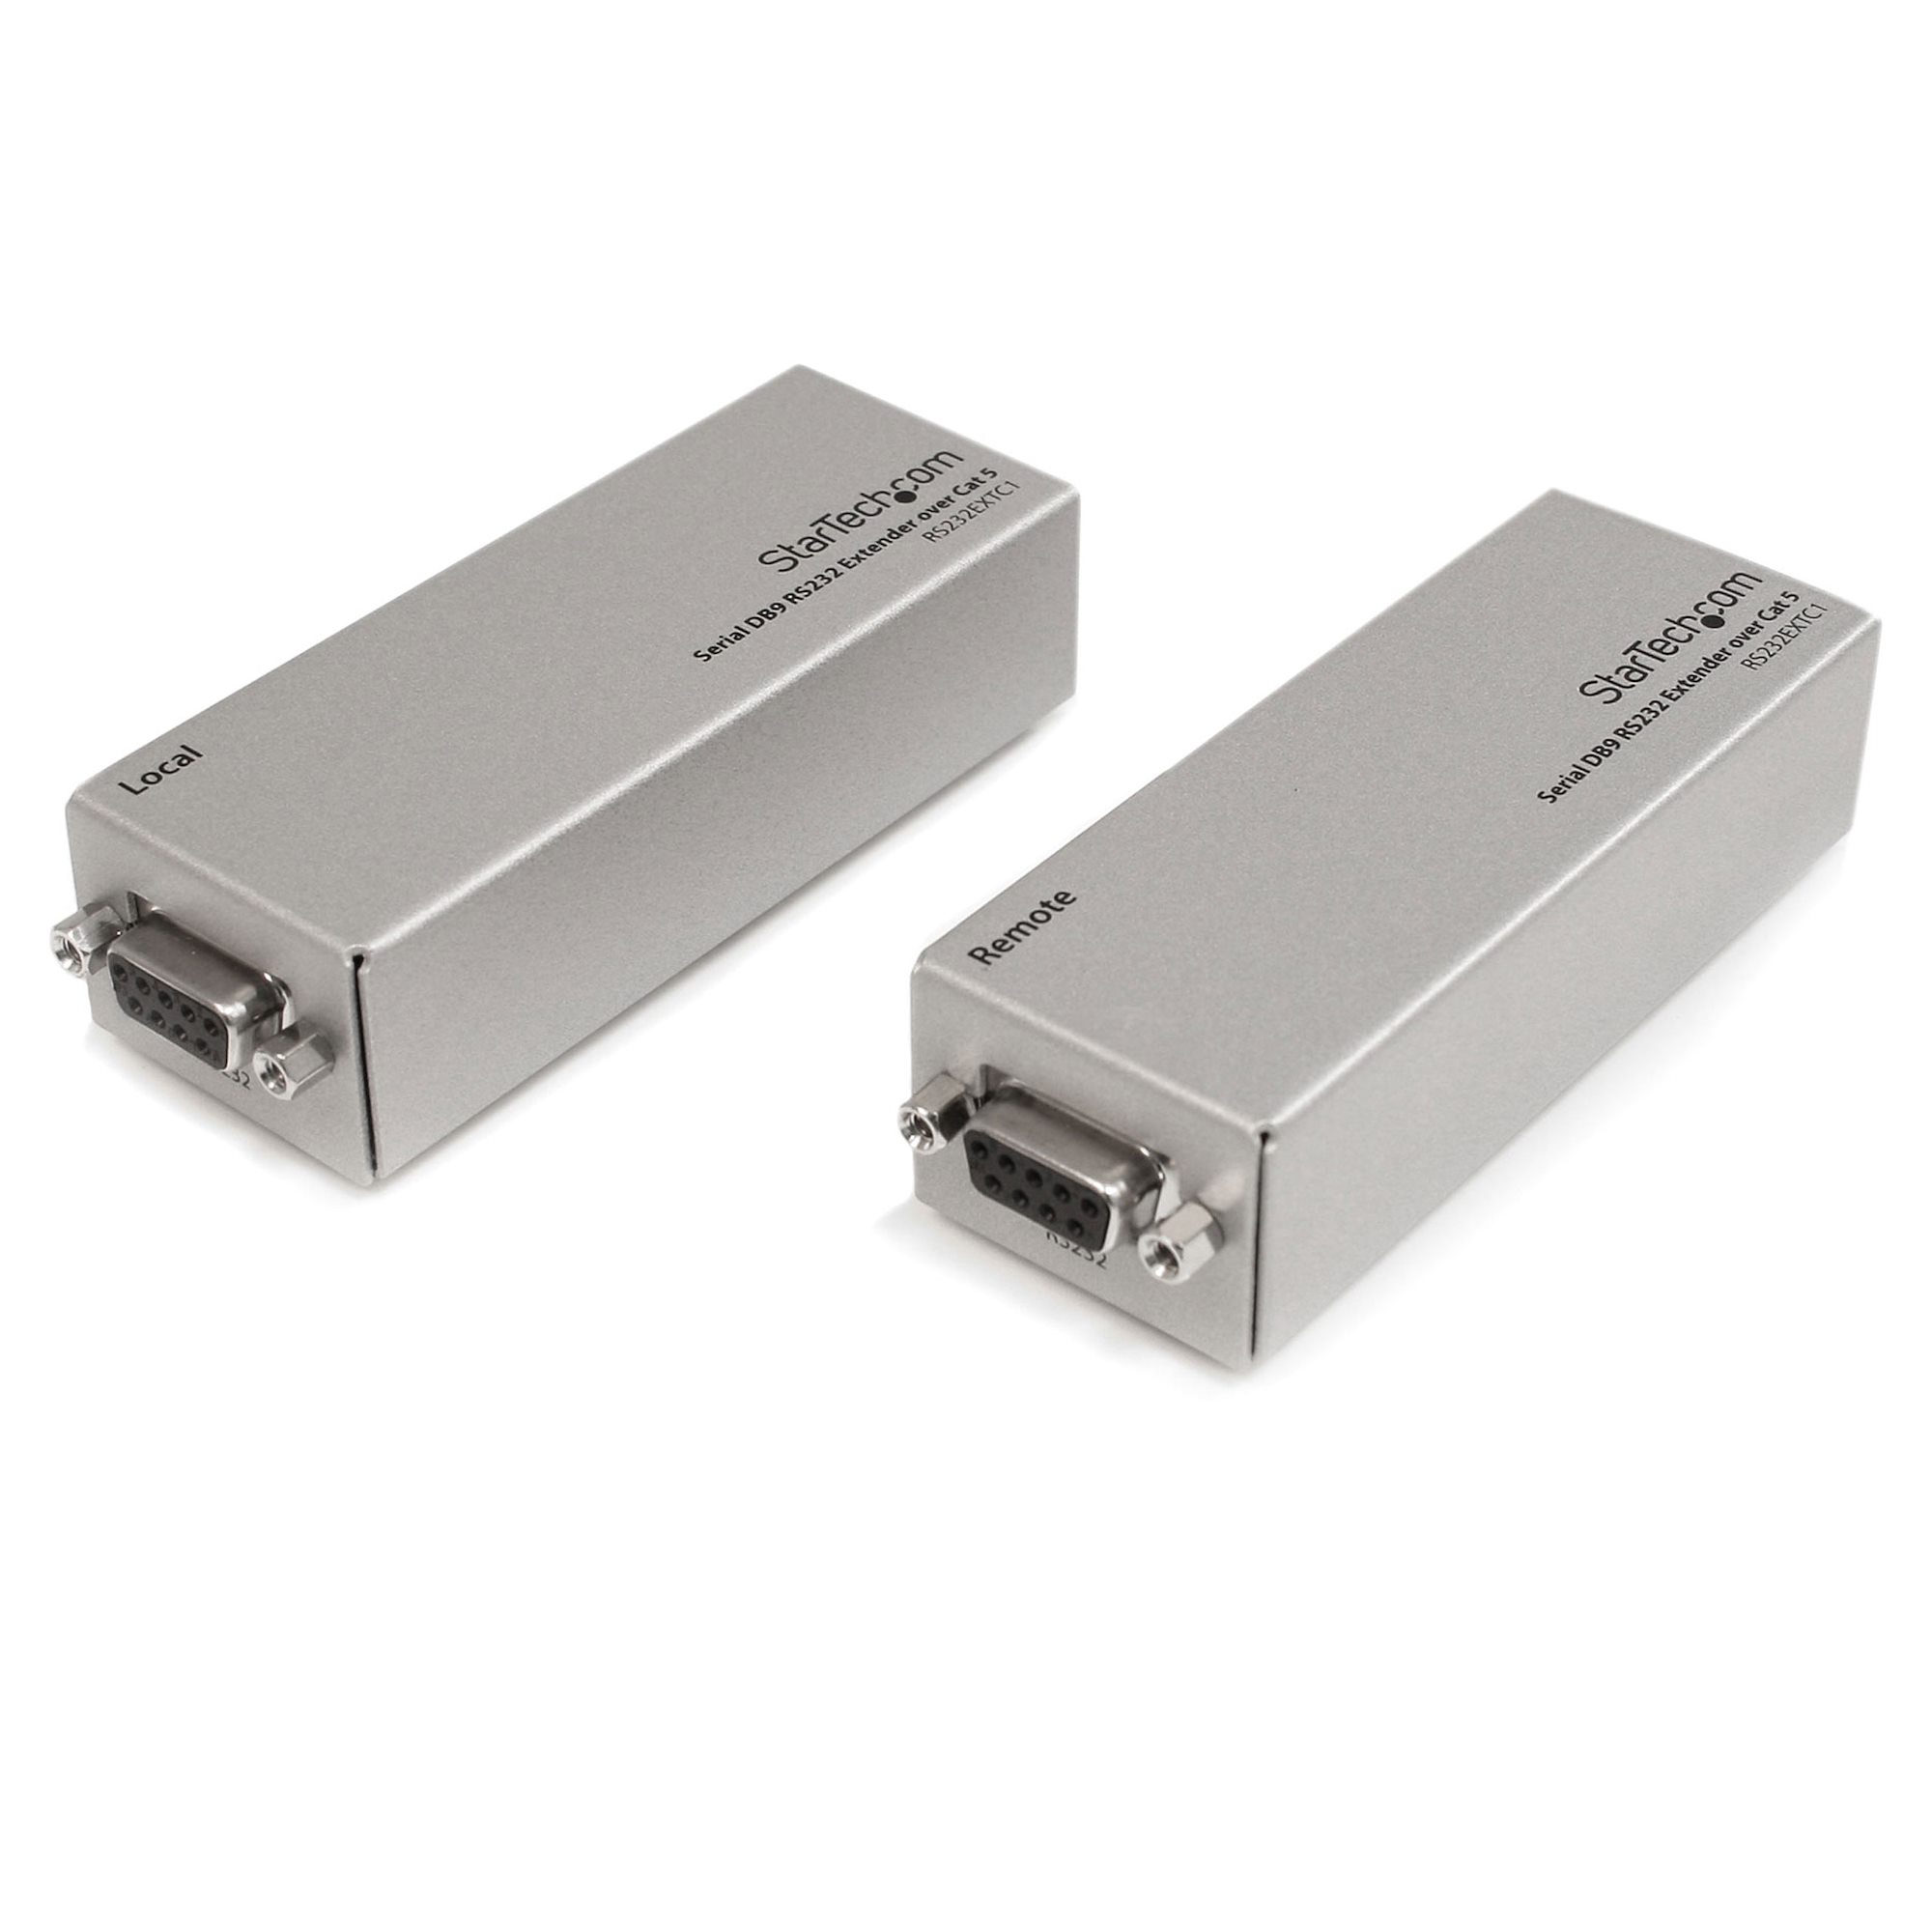 【RS232EXTC1】SERIAL EXTENDER OVER CAT 5